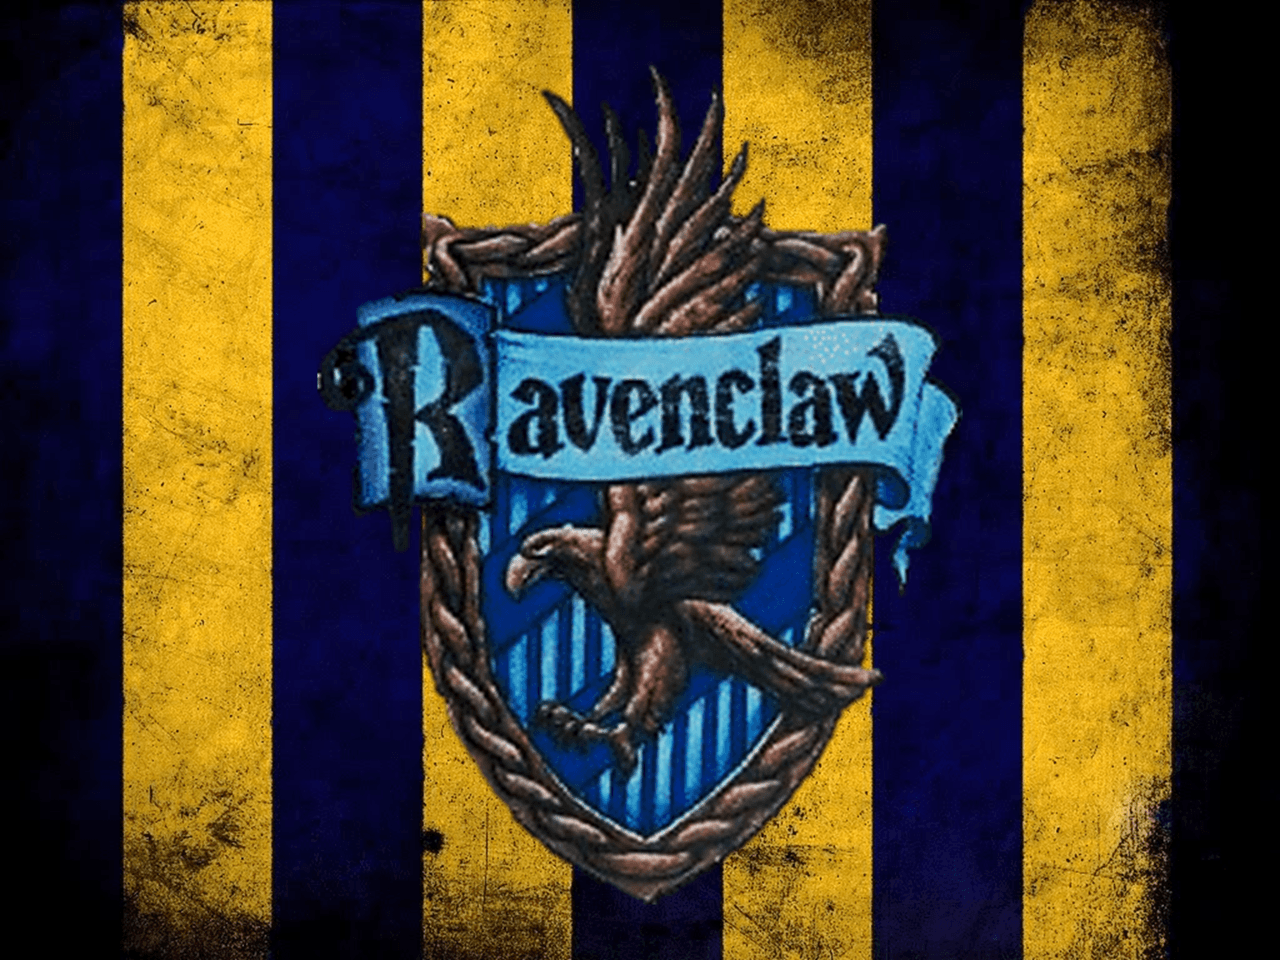 Ravenclaw Wallpaper  Top 30 Free Ravenclaw Backgrounds for iPhone  Harry  potter poster Harry potter wallpaper backgrounds Harry potter background